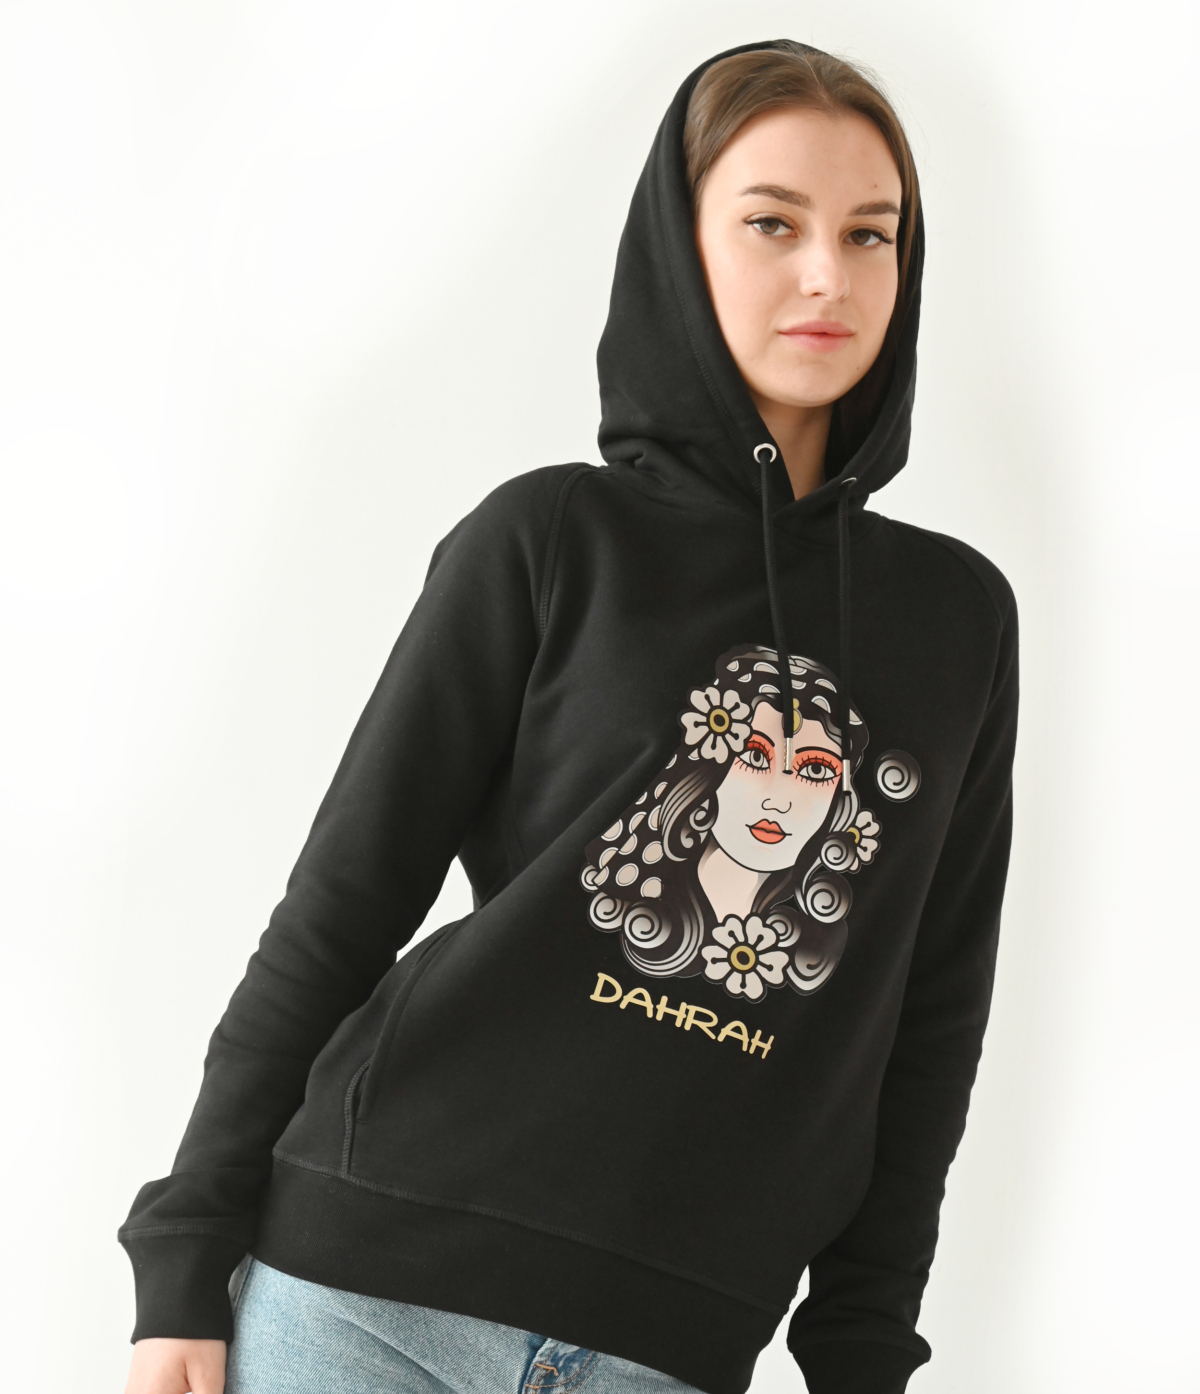 Beautiful high quality organic hoodie with print of a pirate girl in traditional tattoo style designed by Dahrah Darah Fashion.